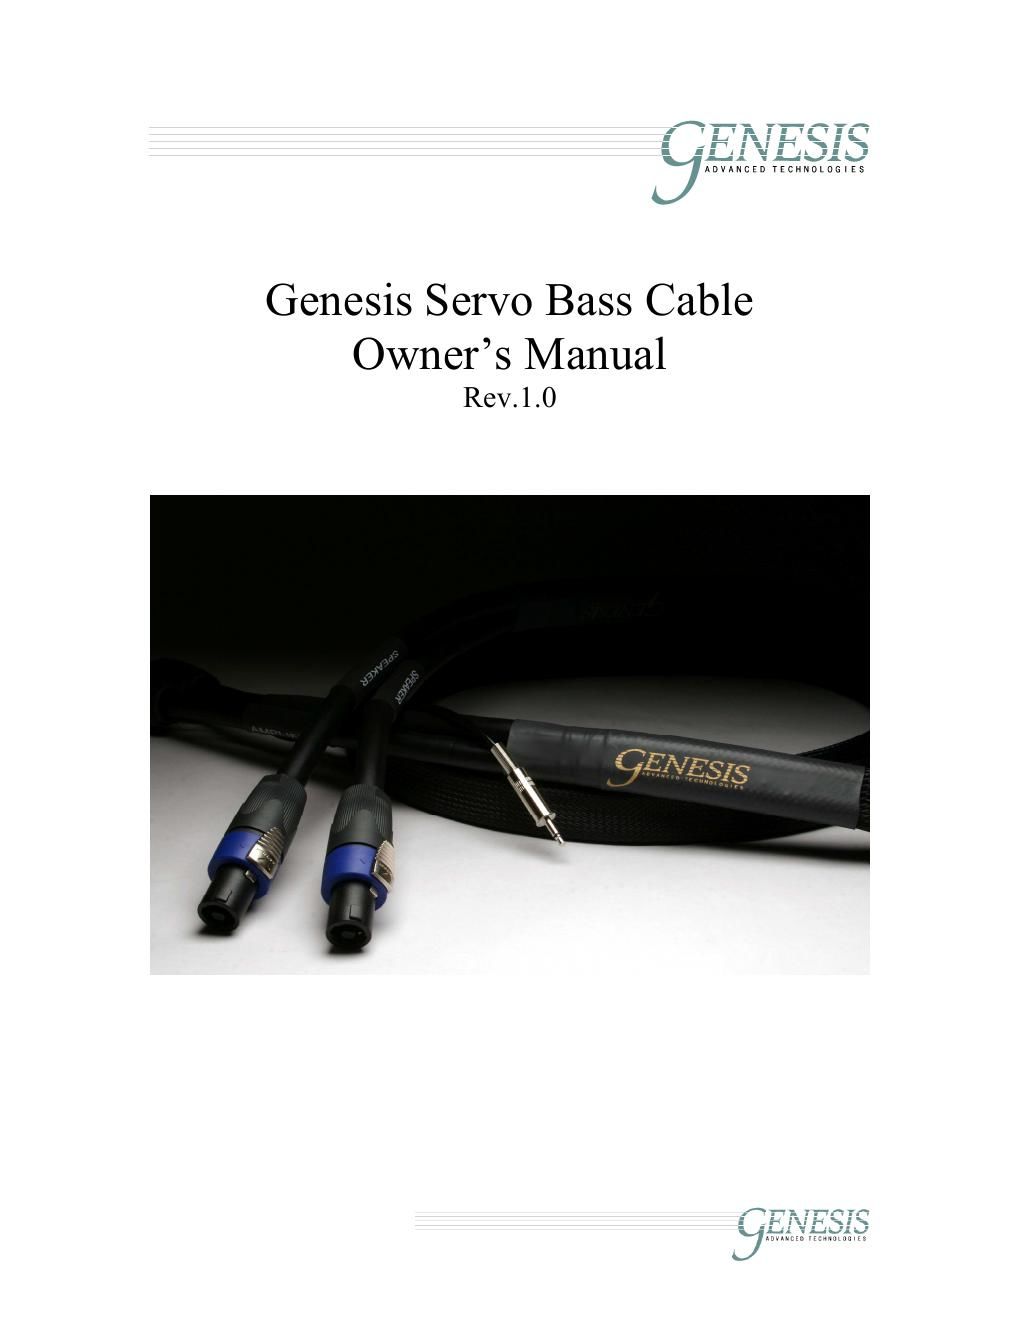 genesis servo bass cables owners manual